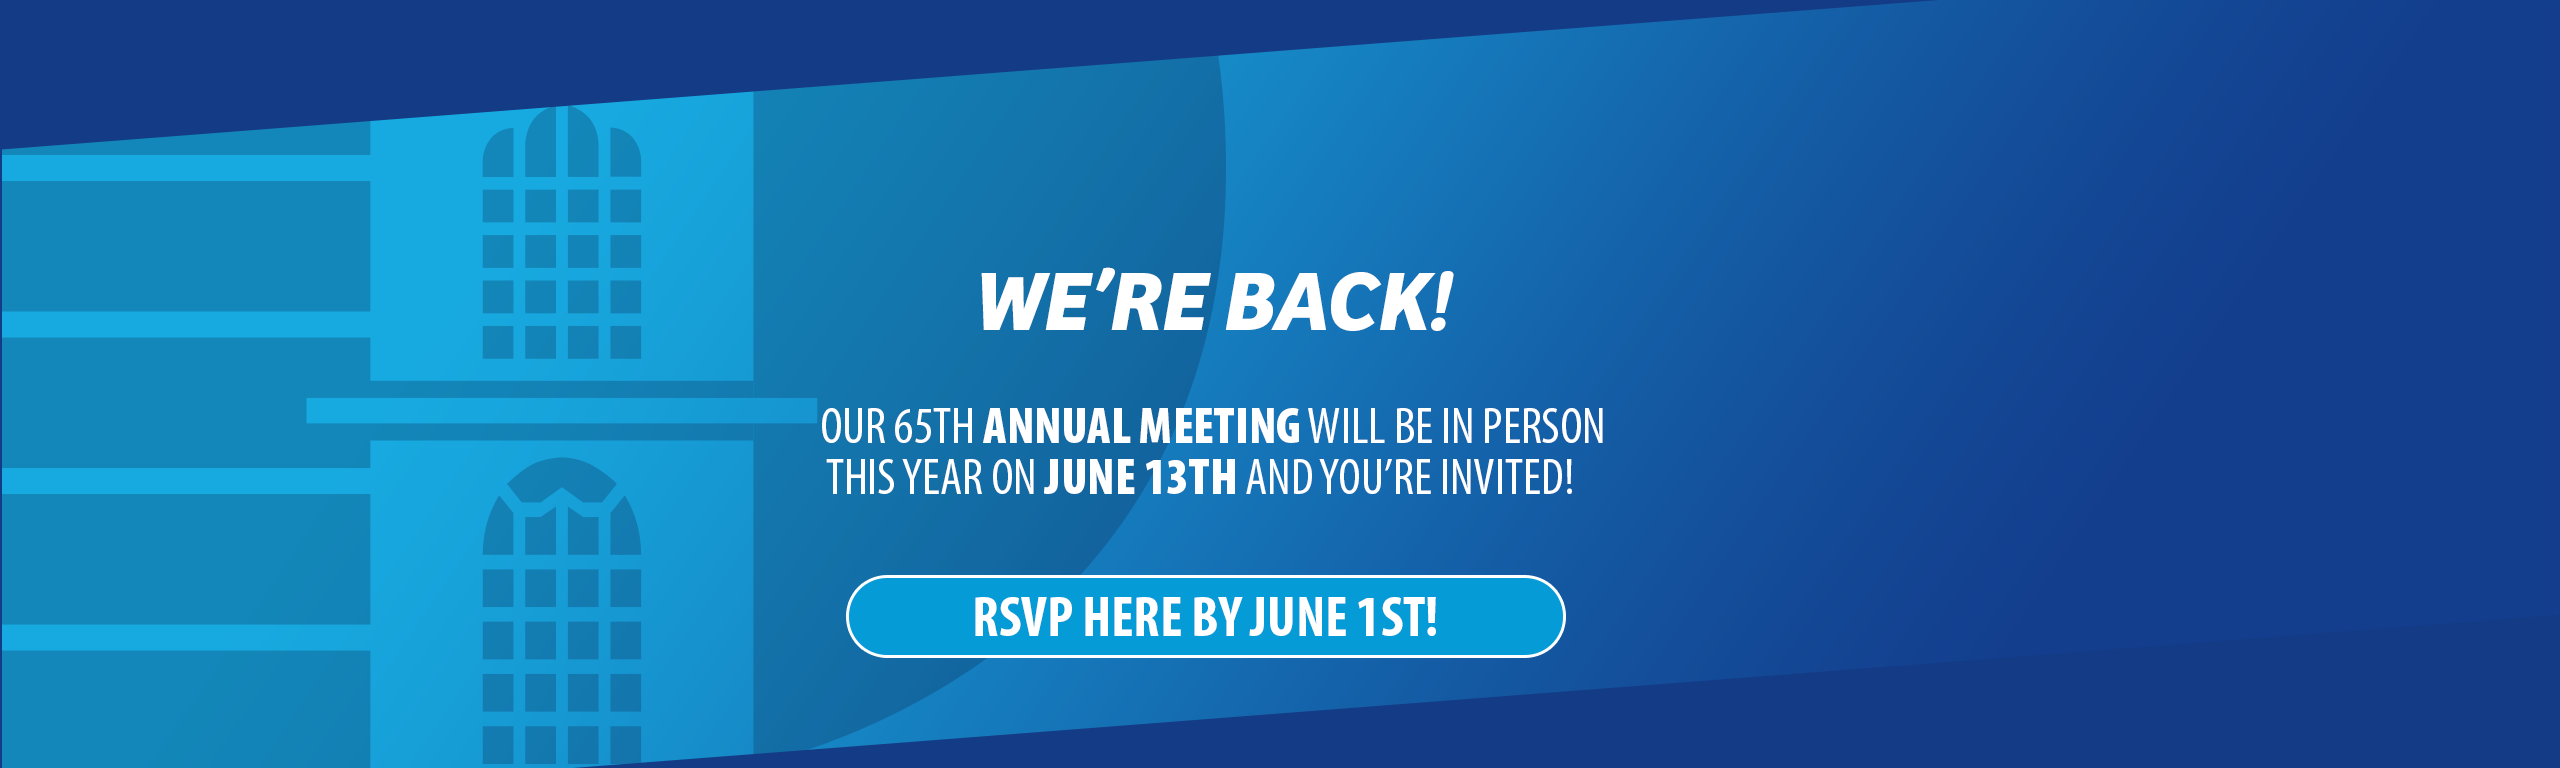 Our 65TH ANNUAL MEETING will be IN PERSON THIS YEAR on June 13th and YOU’RE INVITED!